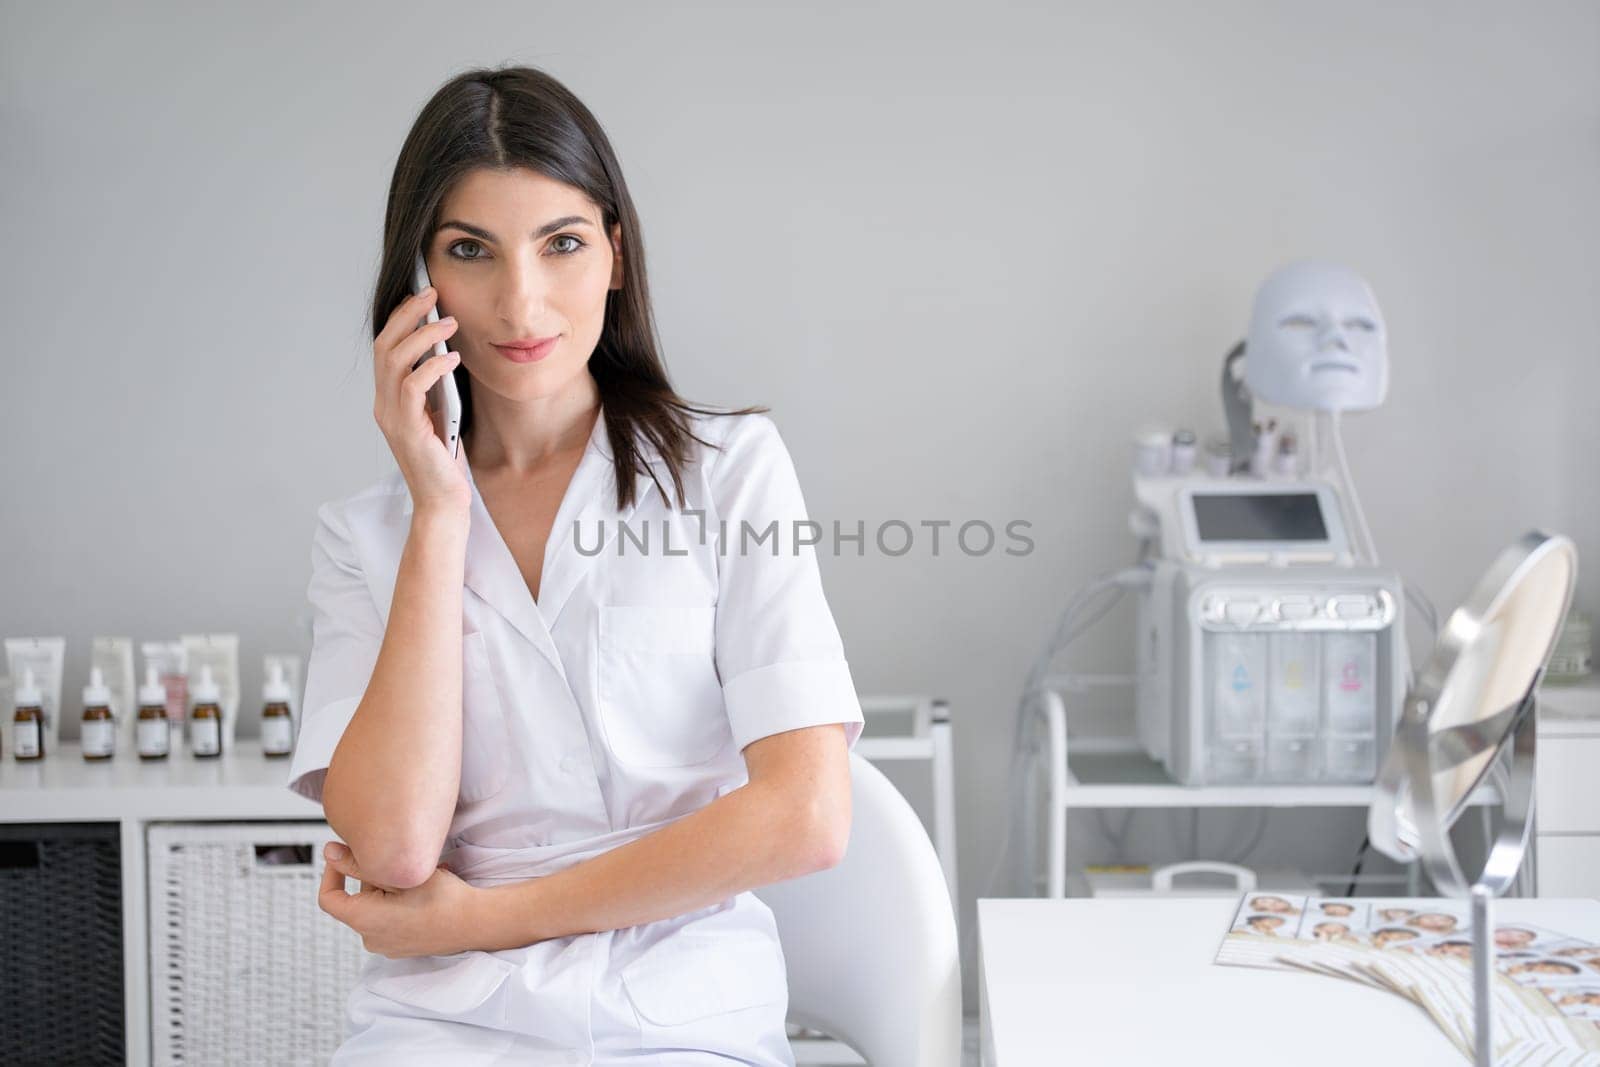 Beautician in cosmetology office have phone conversation. Dermatologist standing in beauty clinic discussing facial skin treatments for clients at beauty spa salon.